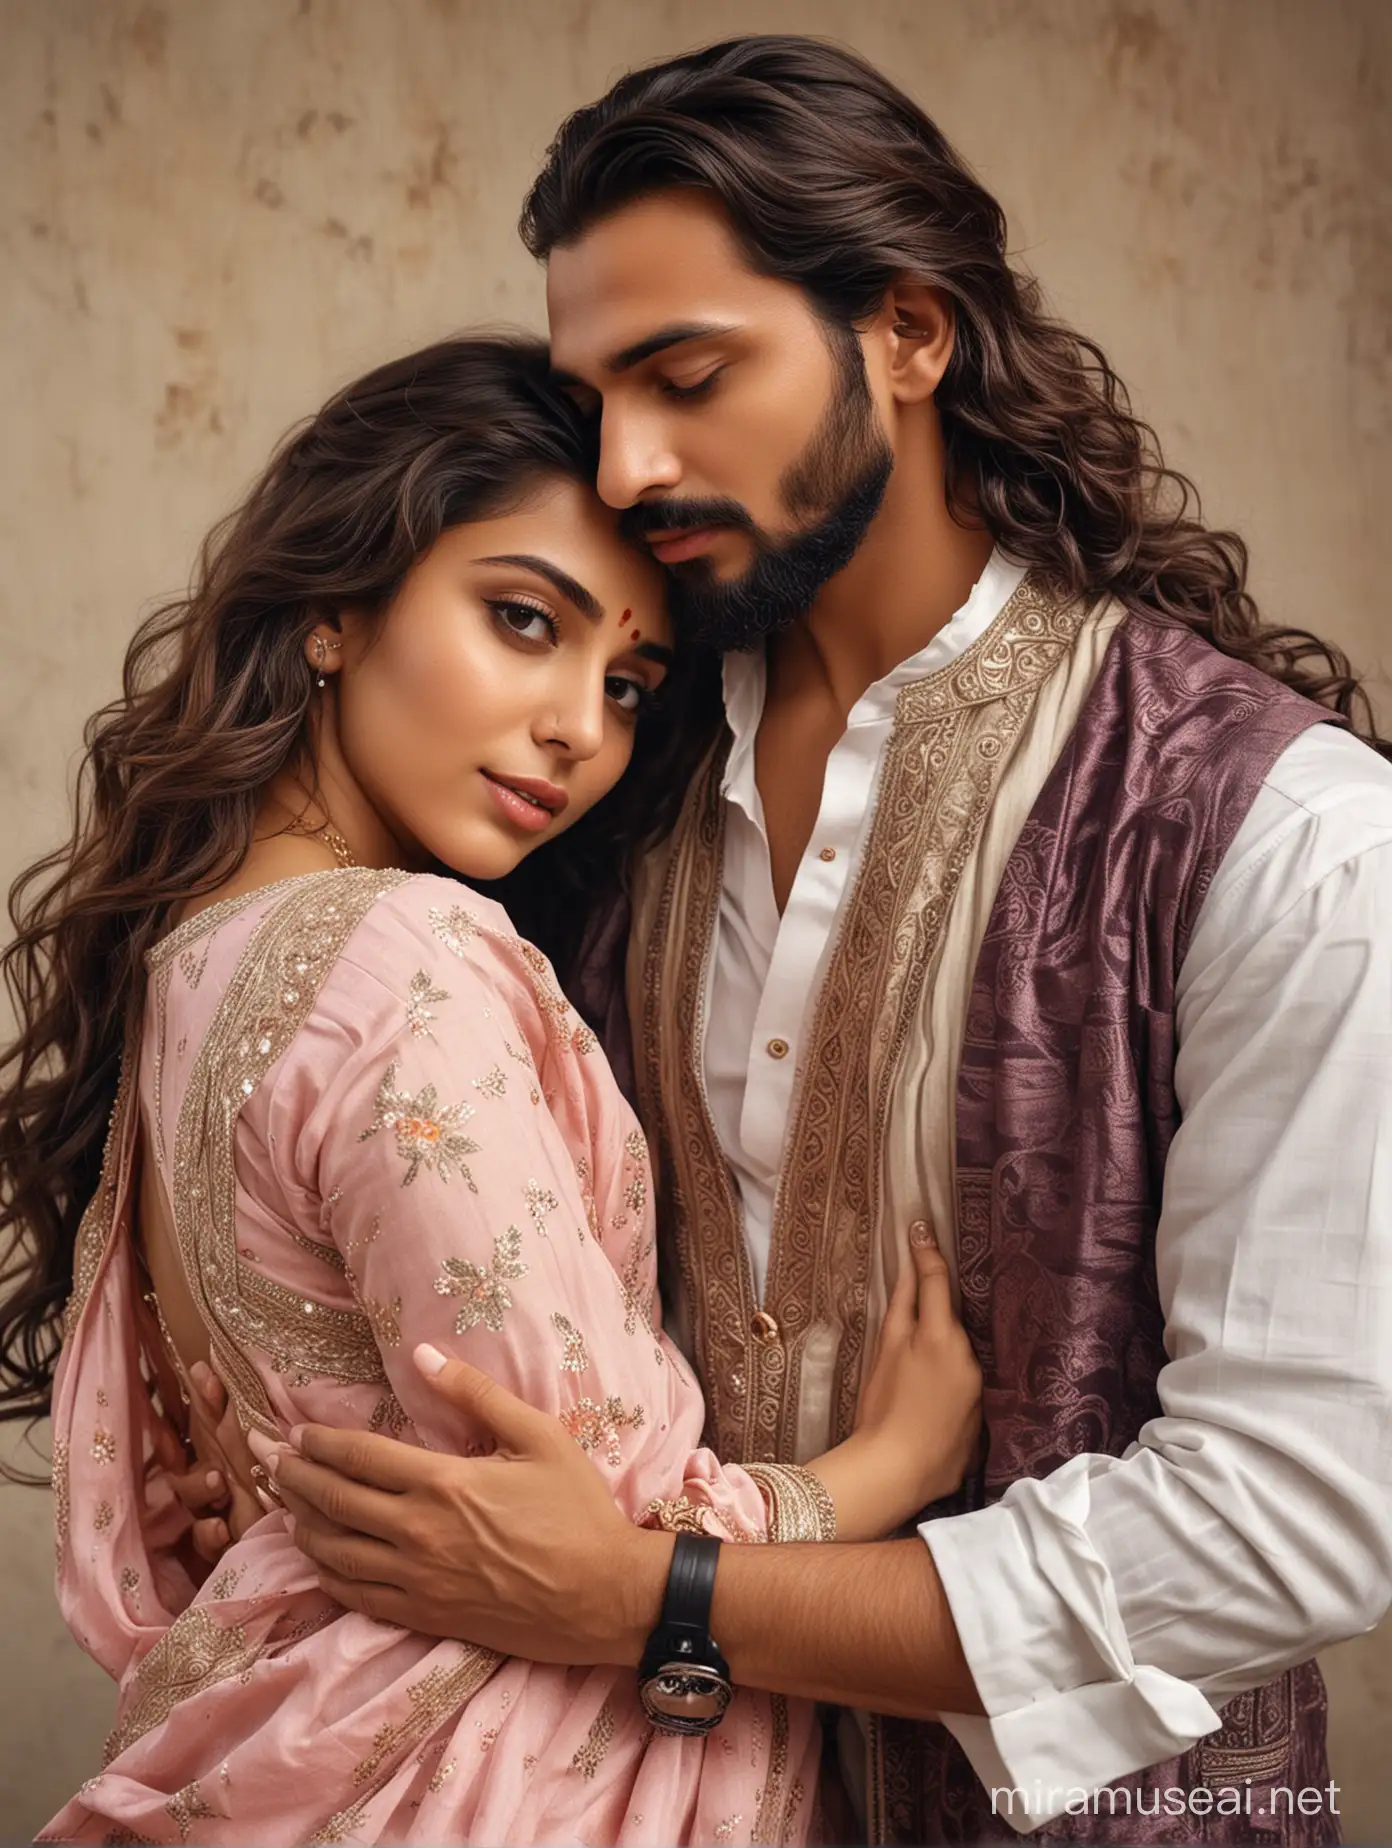 full portrait photo of most beautiful european couple as most beautiful indian couple, most beautiful cute  girl in elegant saree, wide black  eyes, full face, girl has long wavy  hair cascading, makeup, blouse  low cut back,  girl embracing, resting head on chest of man with deep emotion, man comforting girl with hands around her, man with stylish beard and in formal shirt and tie, photo realistic, 4k.